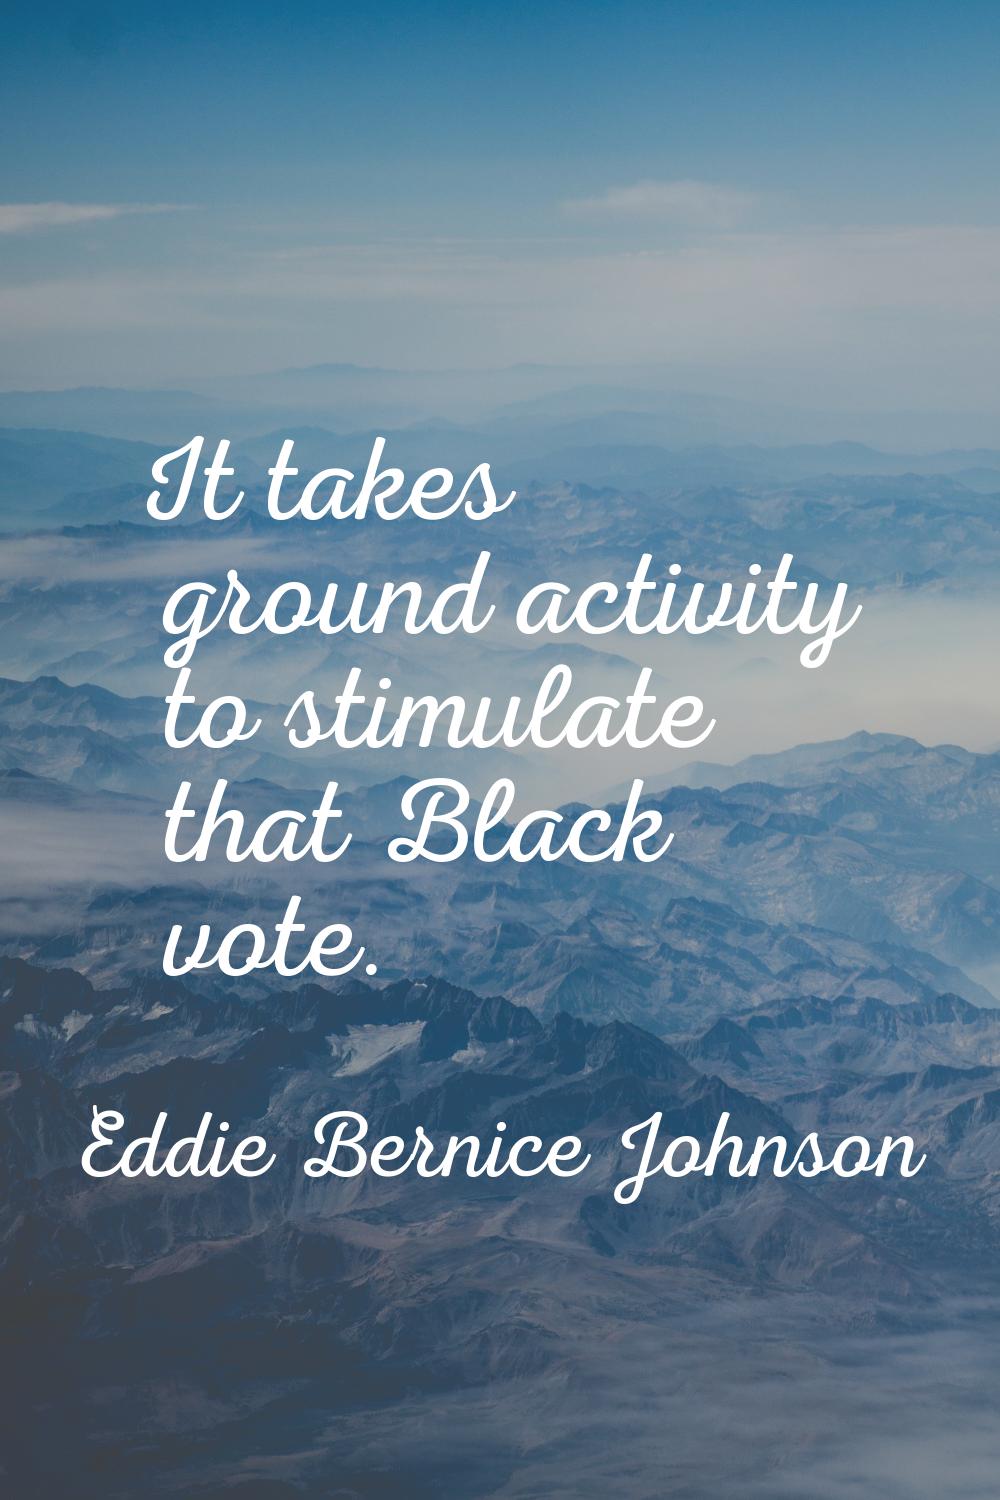 It takes ground activity to stimulate that Black vote.